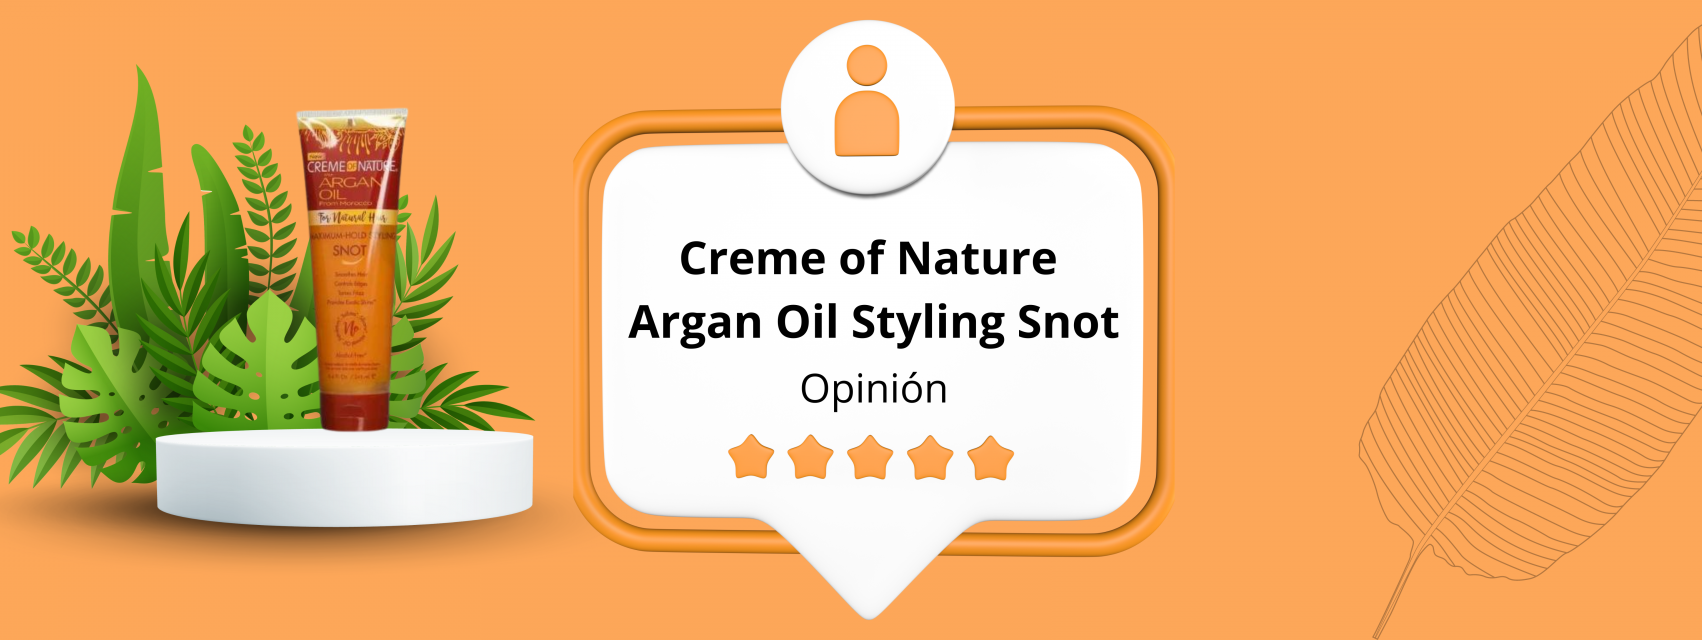 Creme of Nature Argan Oil Styling Snot